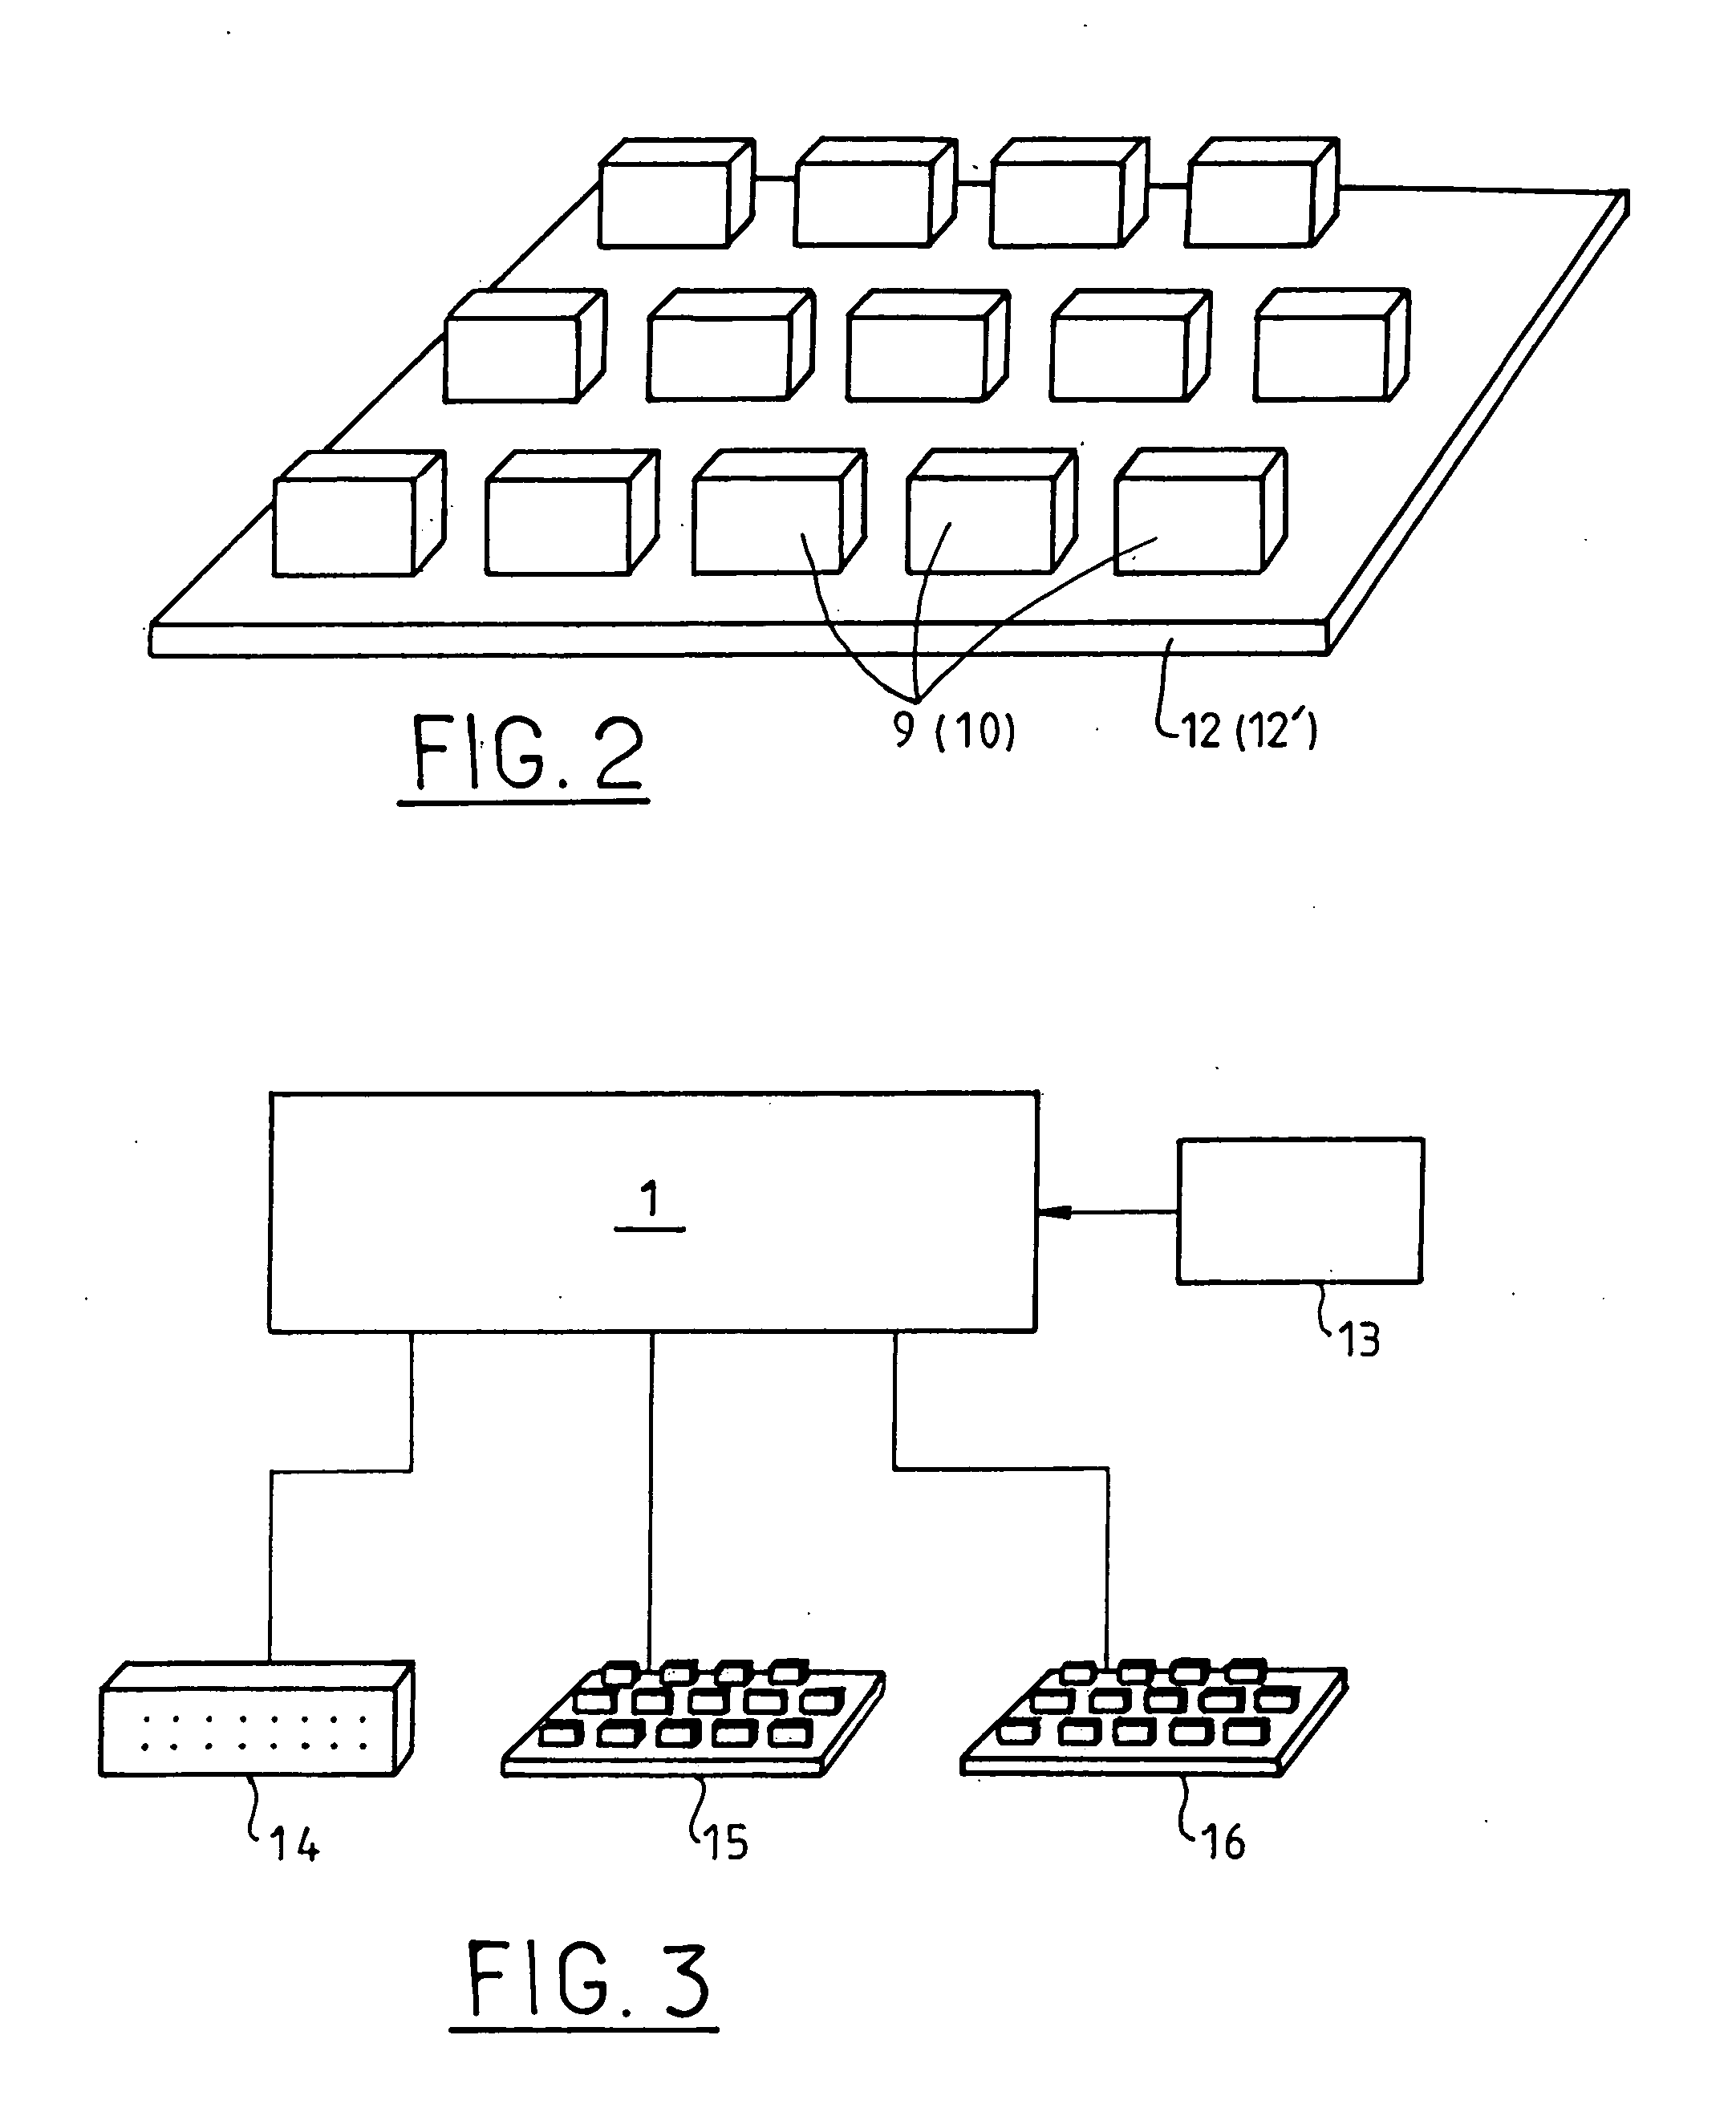 Core sampling device intended to assemble tissue arrays